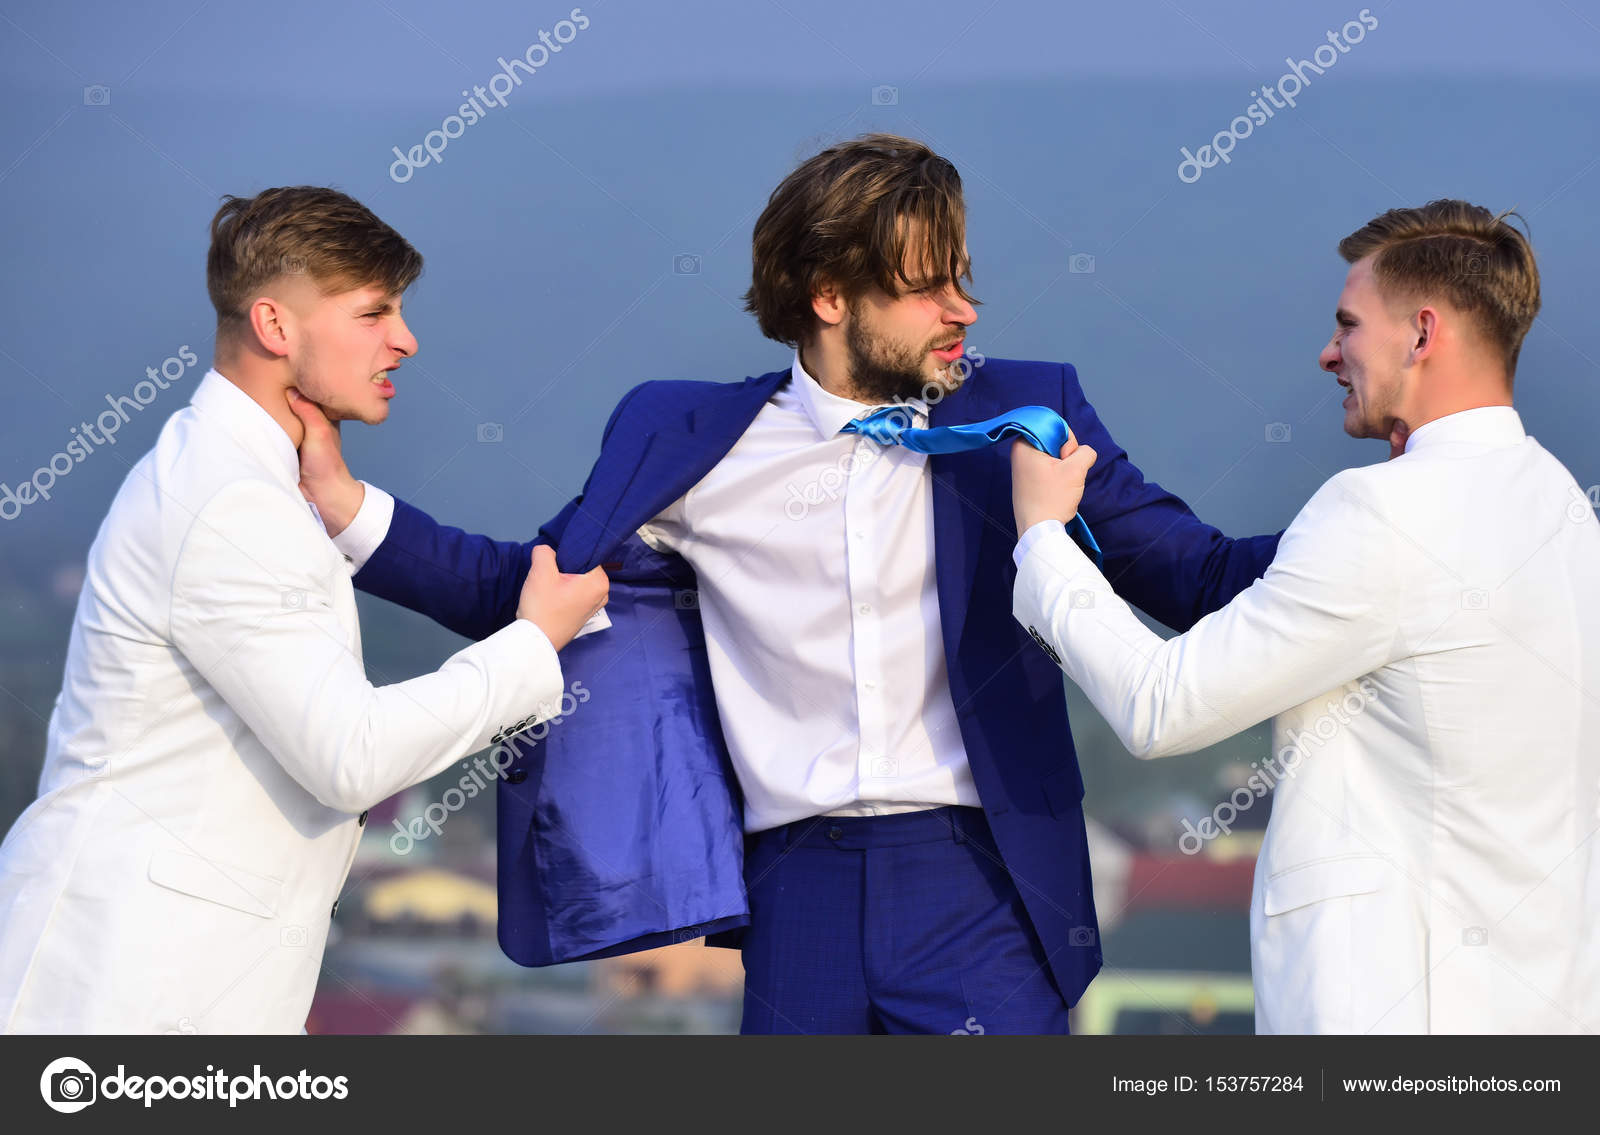 Boss and employee, conflict, interest conflict, pressure and raidership, Stock Photo by ©Tverdohlib.com 153757284